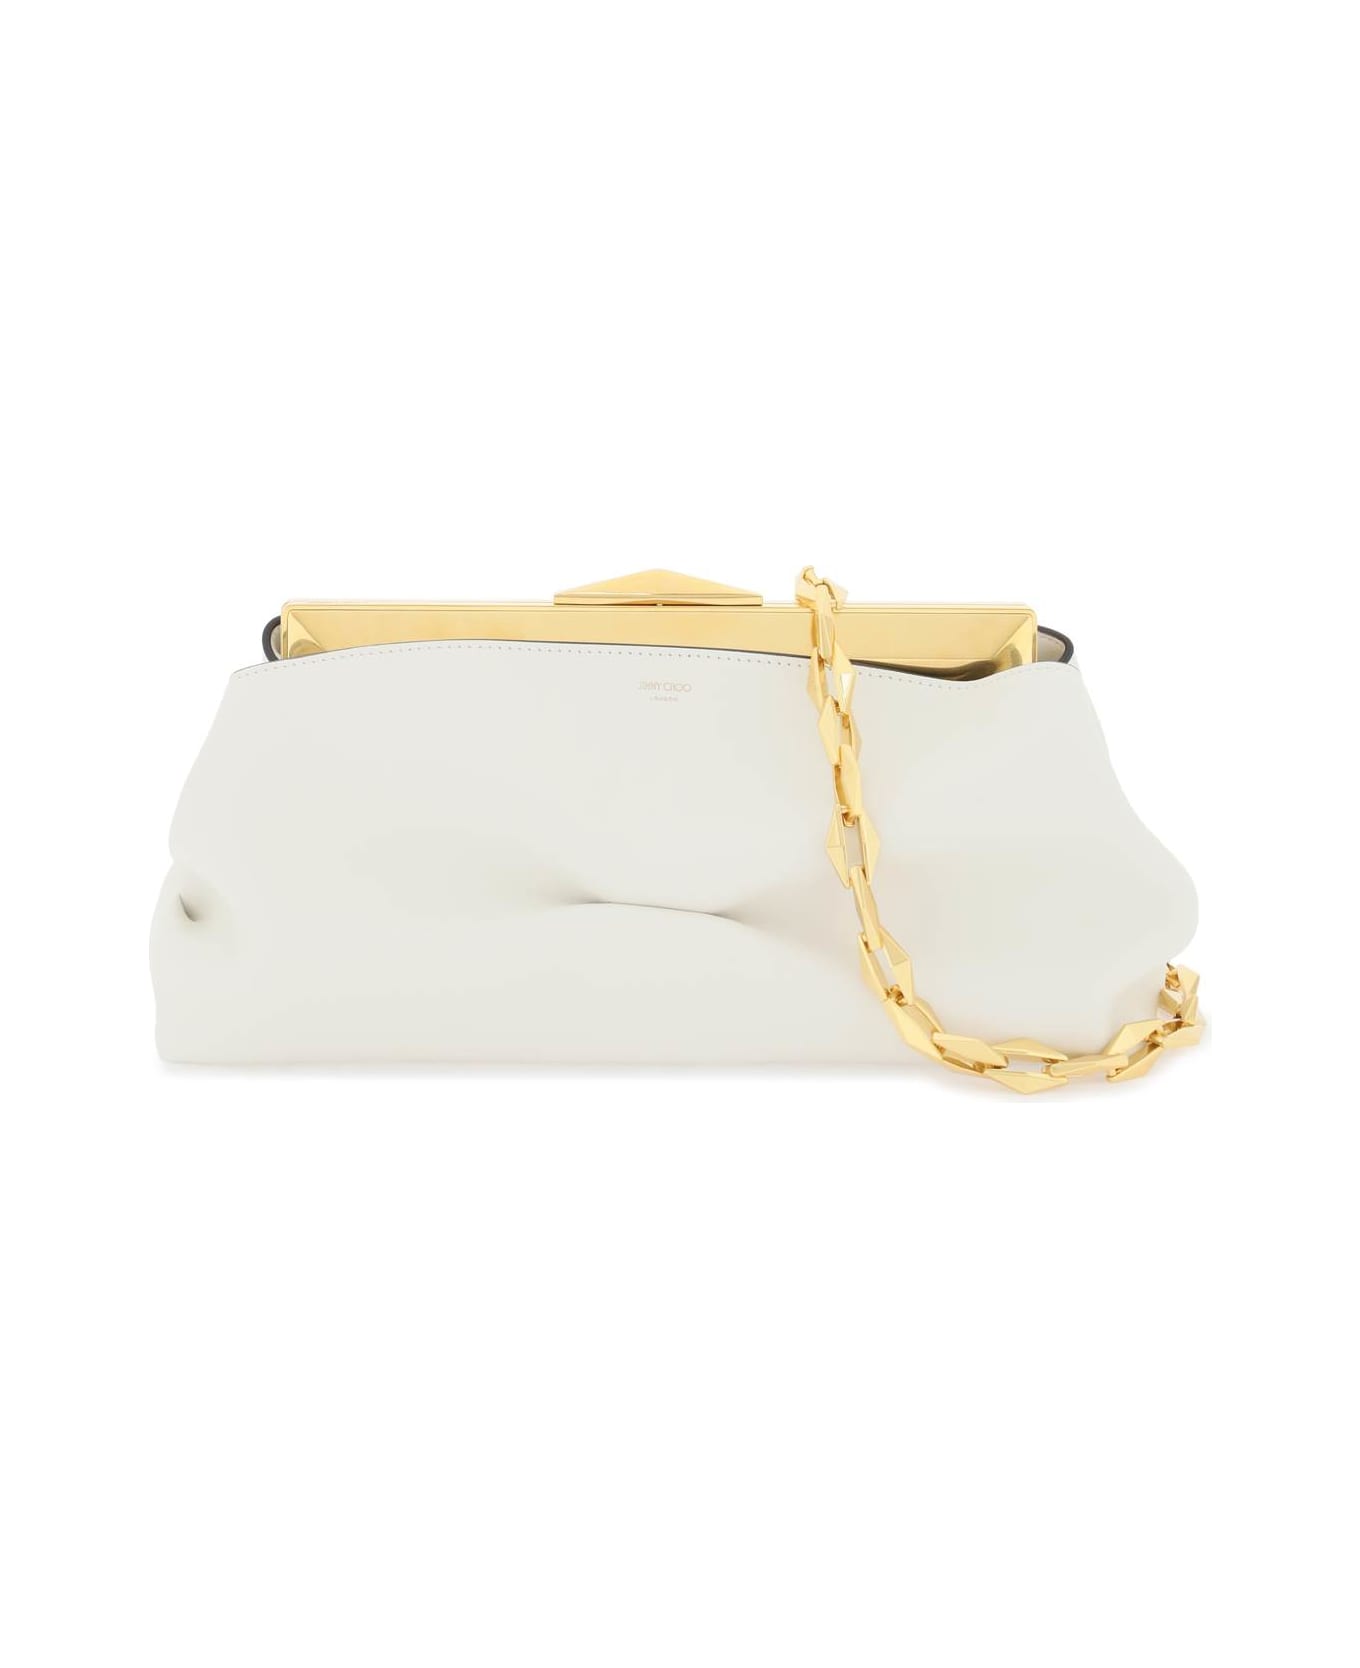 Jimmy Choo Leather Diamond Frame Clutch - LATTE GOLD (White) クラッチバッグ